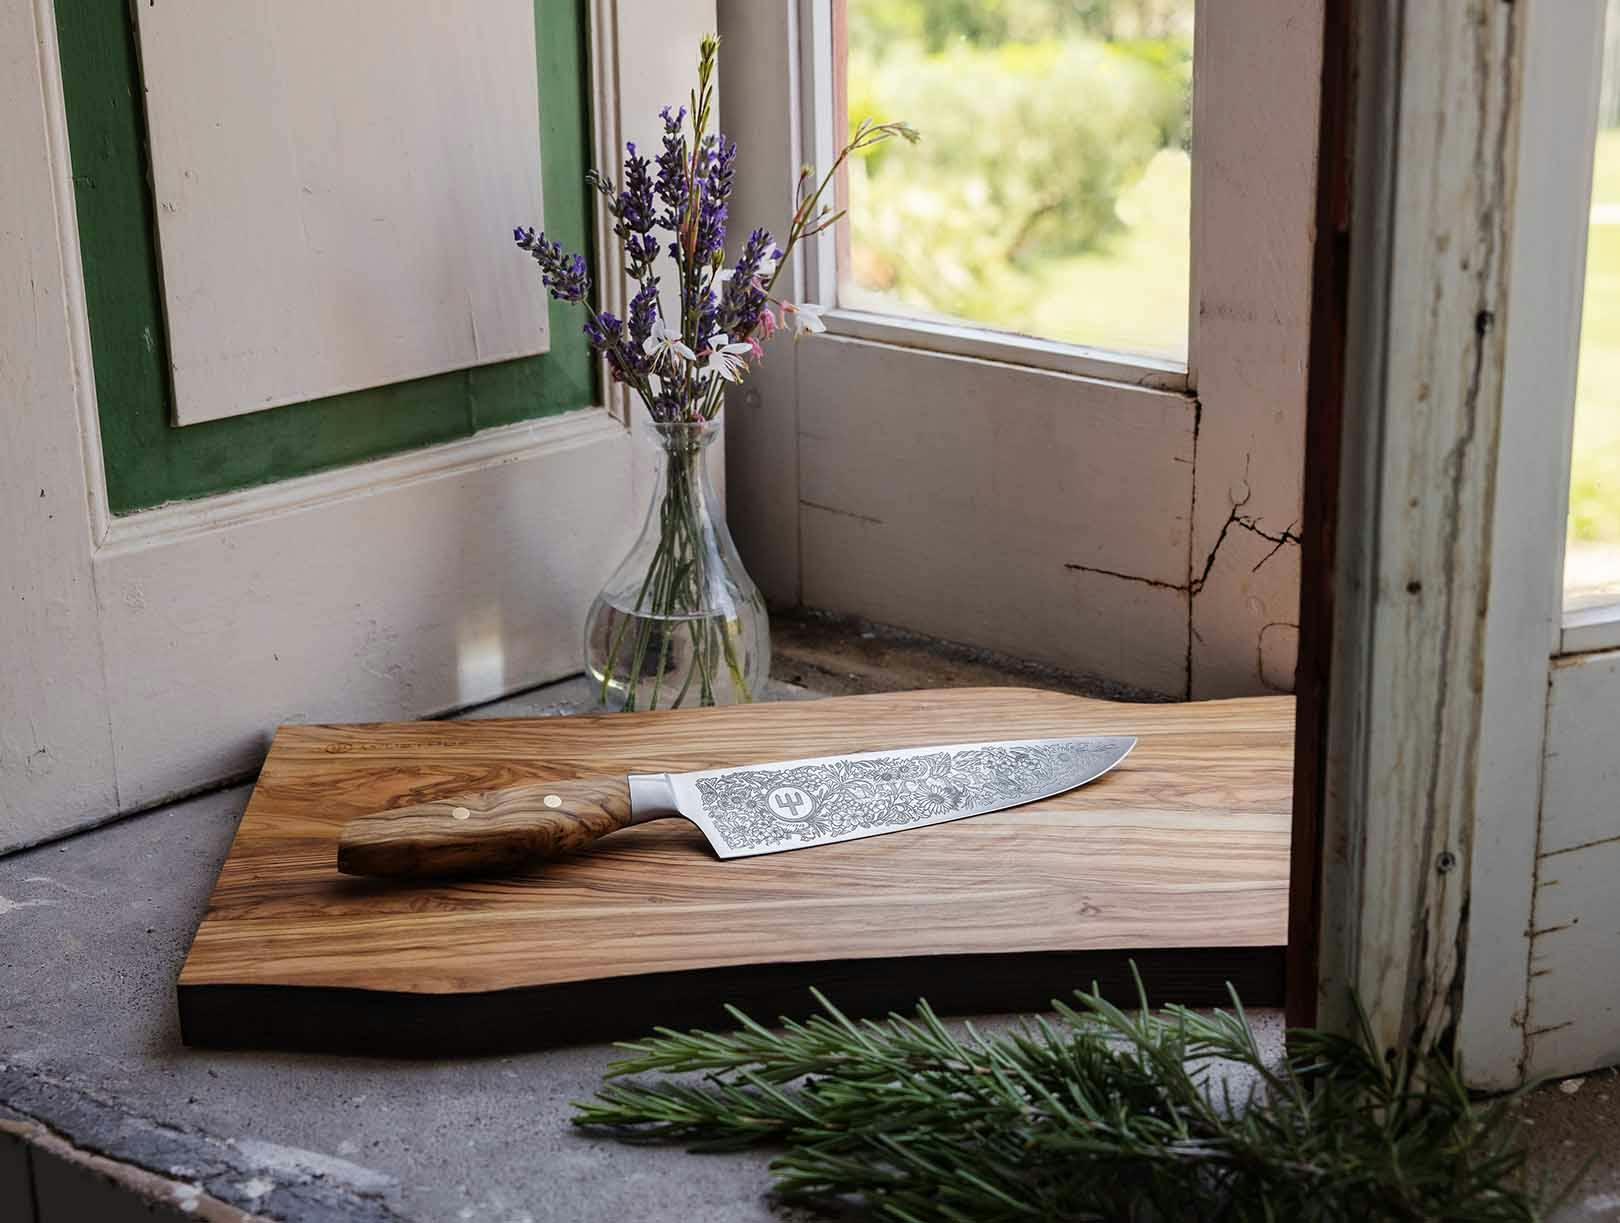 Amici 1814 Chef's knife in front of window on the dune cutting board